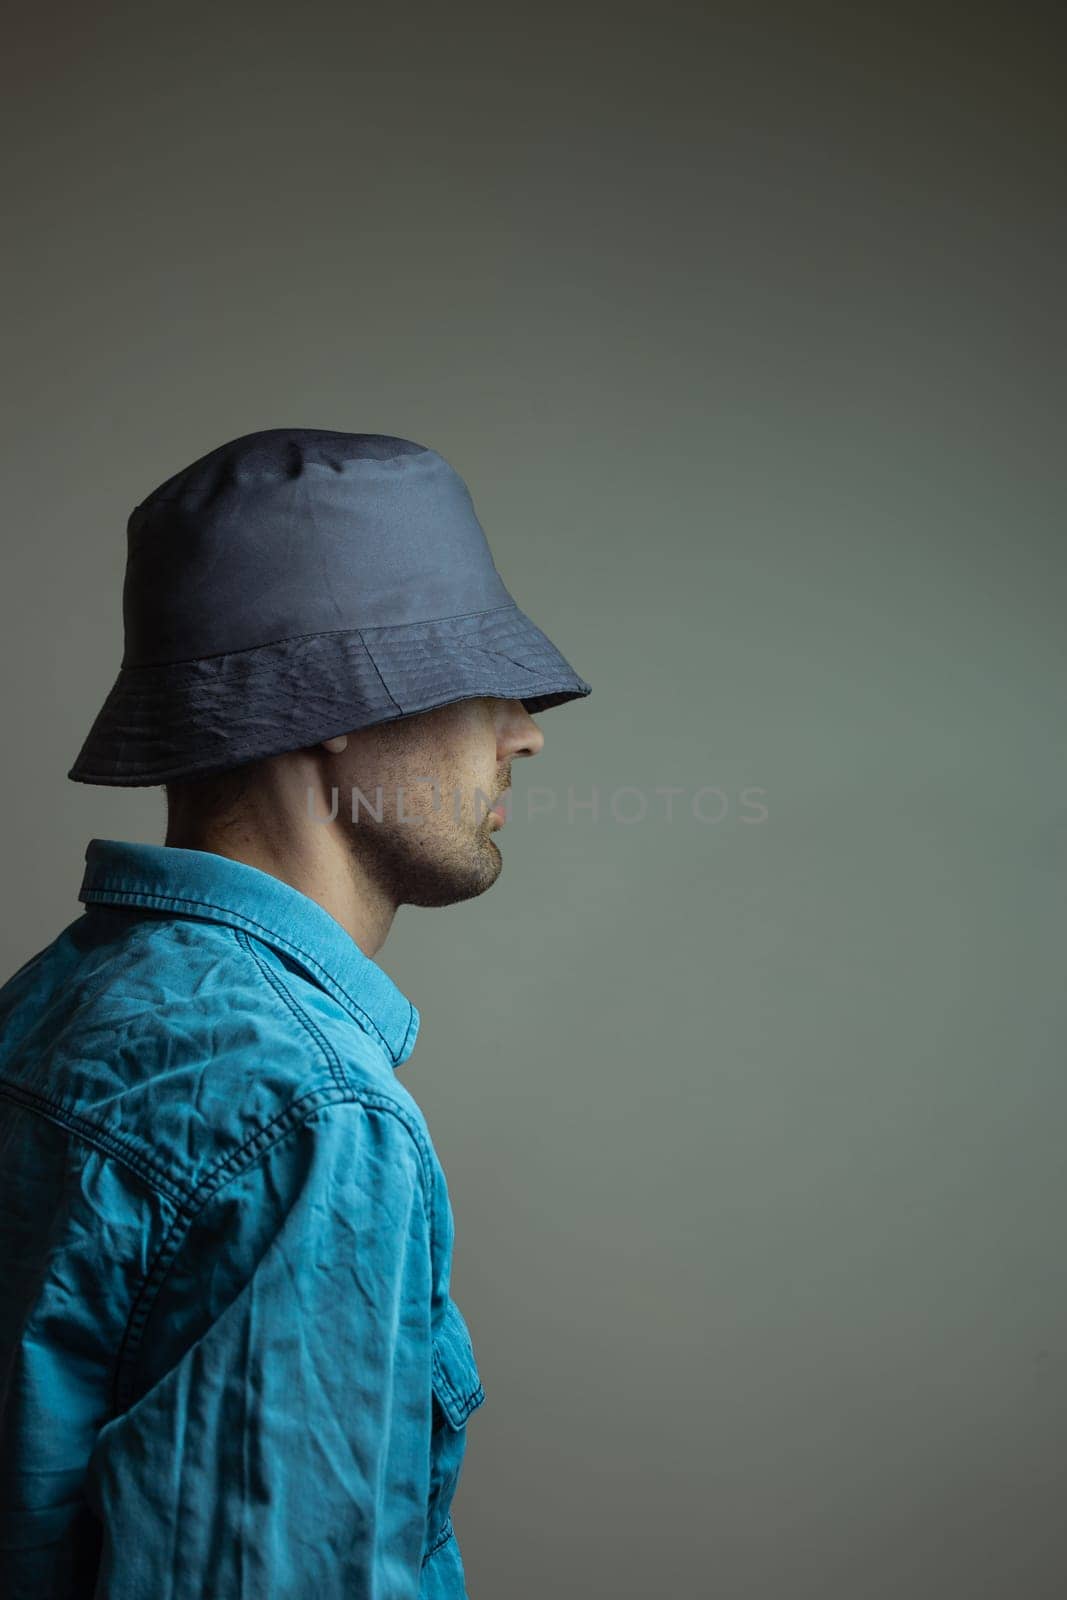 Hipster bearded man wearing a blue shirt and dark hat looking away by Pukhovskiy